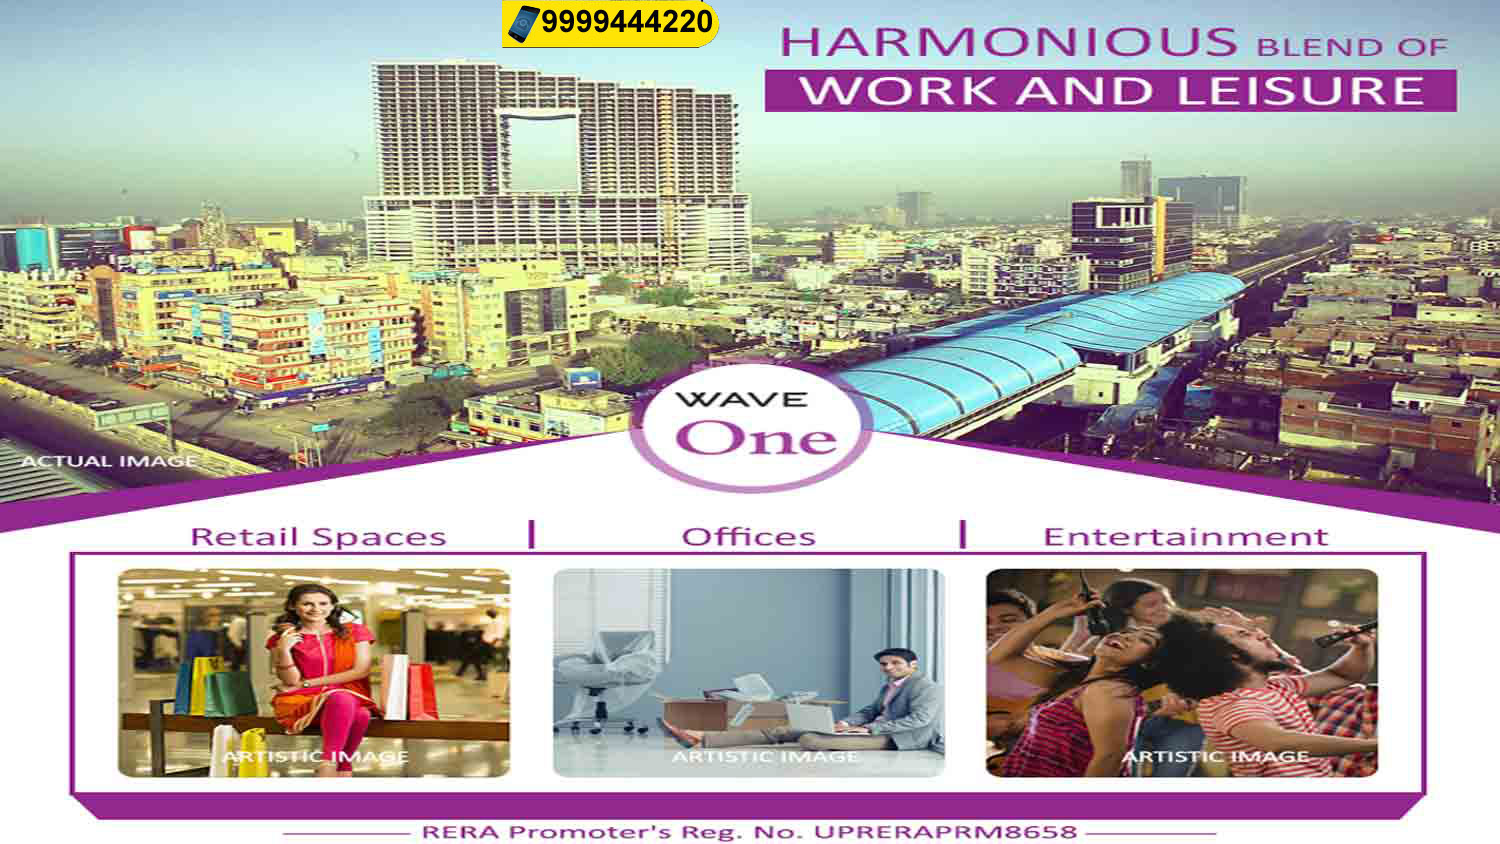 Wave One Noida as a Commercial Project Creates Business Opportunities